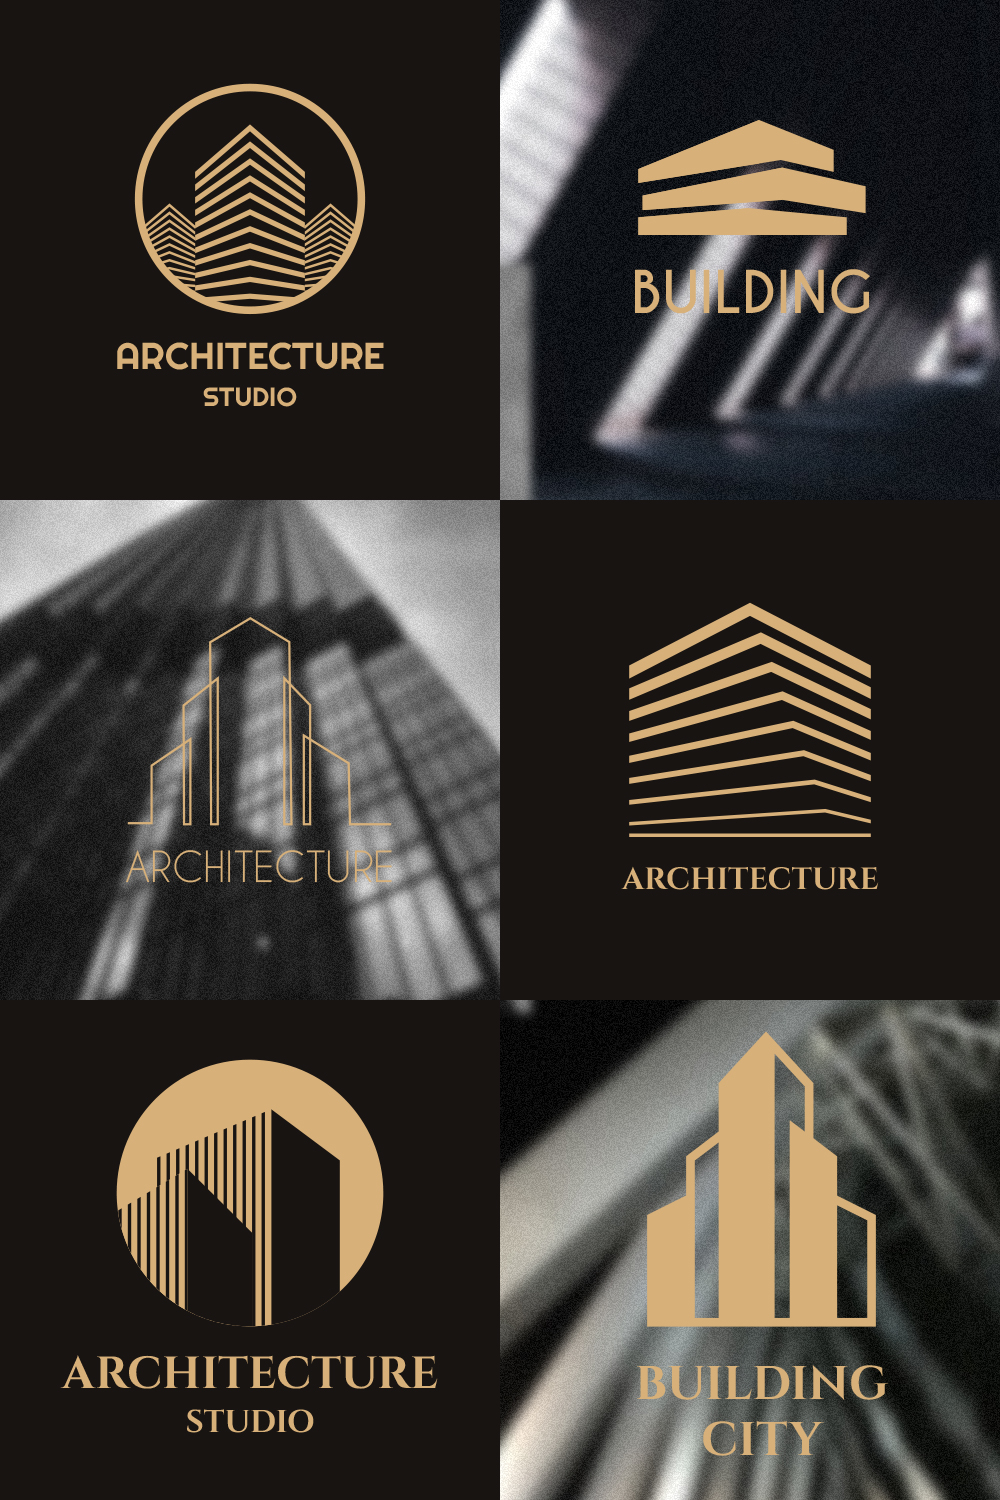 Stylish logo for architecture projects.